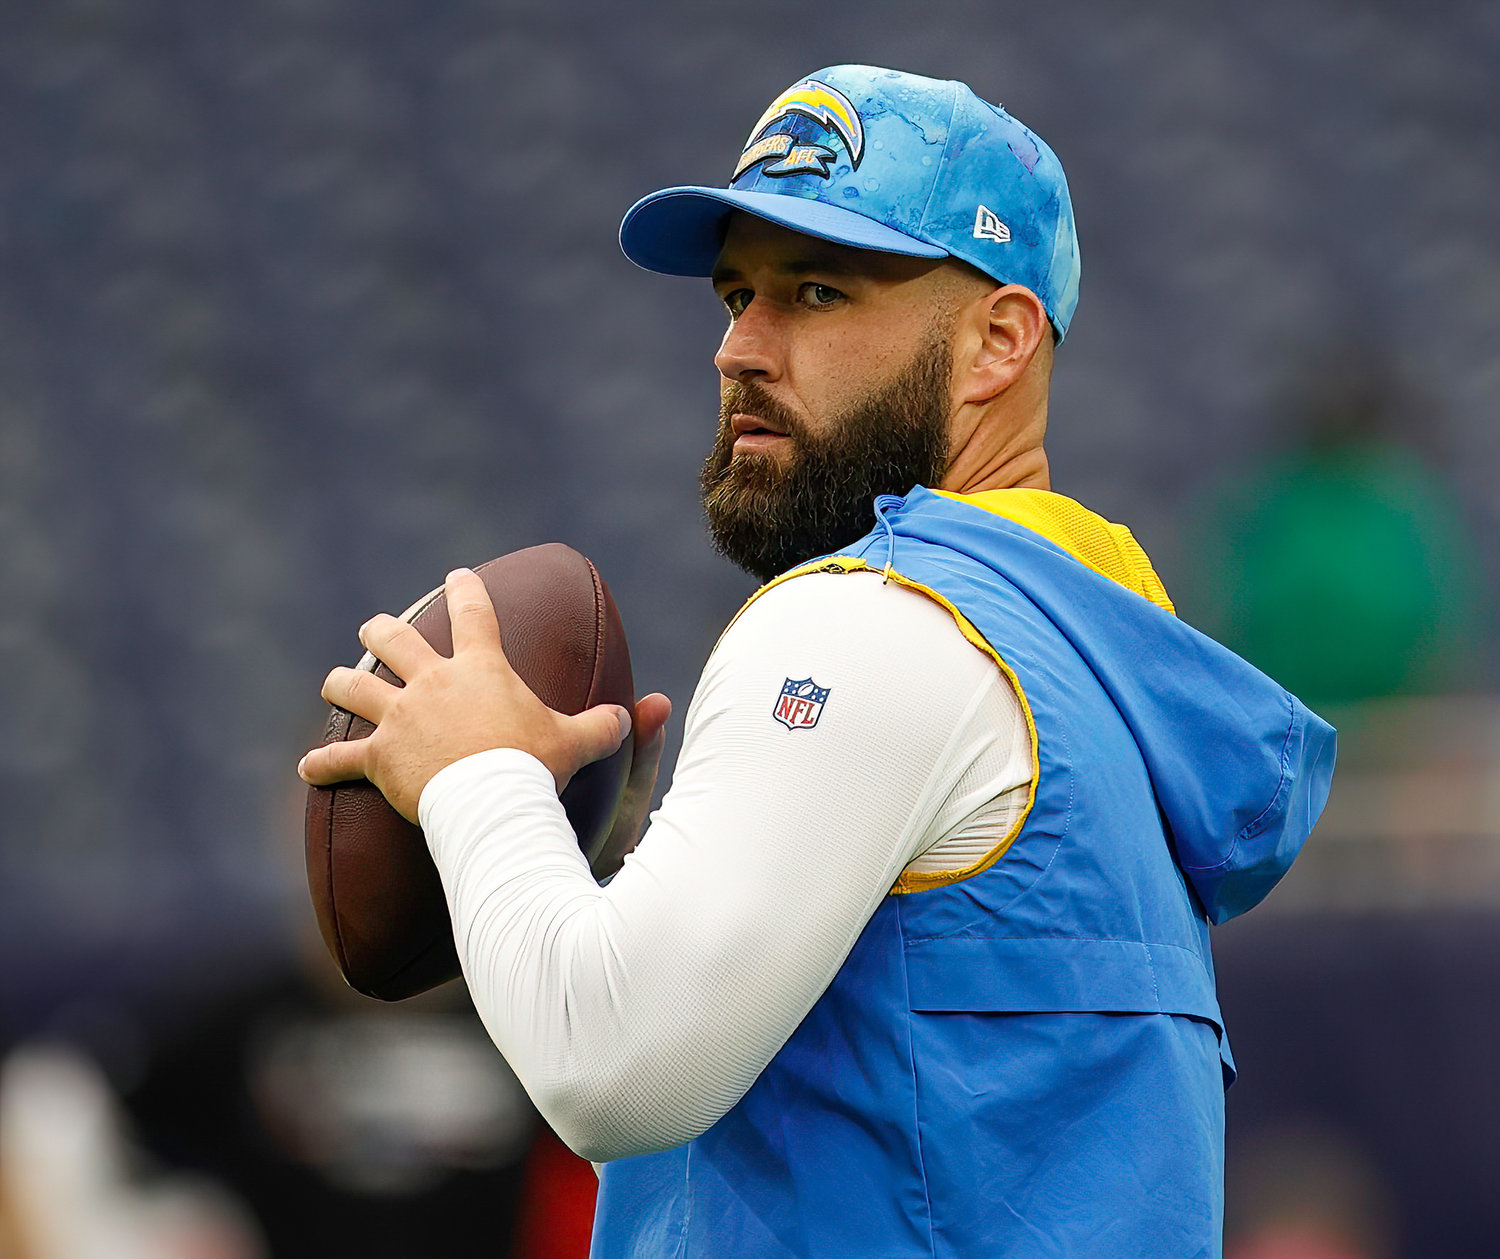 Chargers quarterback Chase Daniel (4) on the field during warmups before the start of an NFL game between the Texans and the Chargers on Oct. 2, 2022 in Houston.